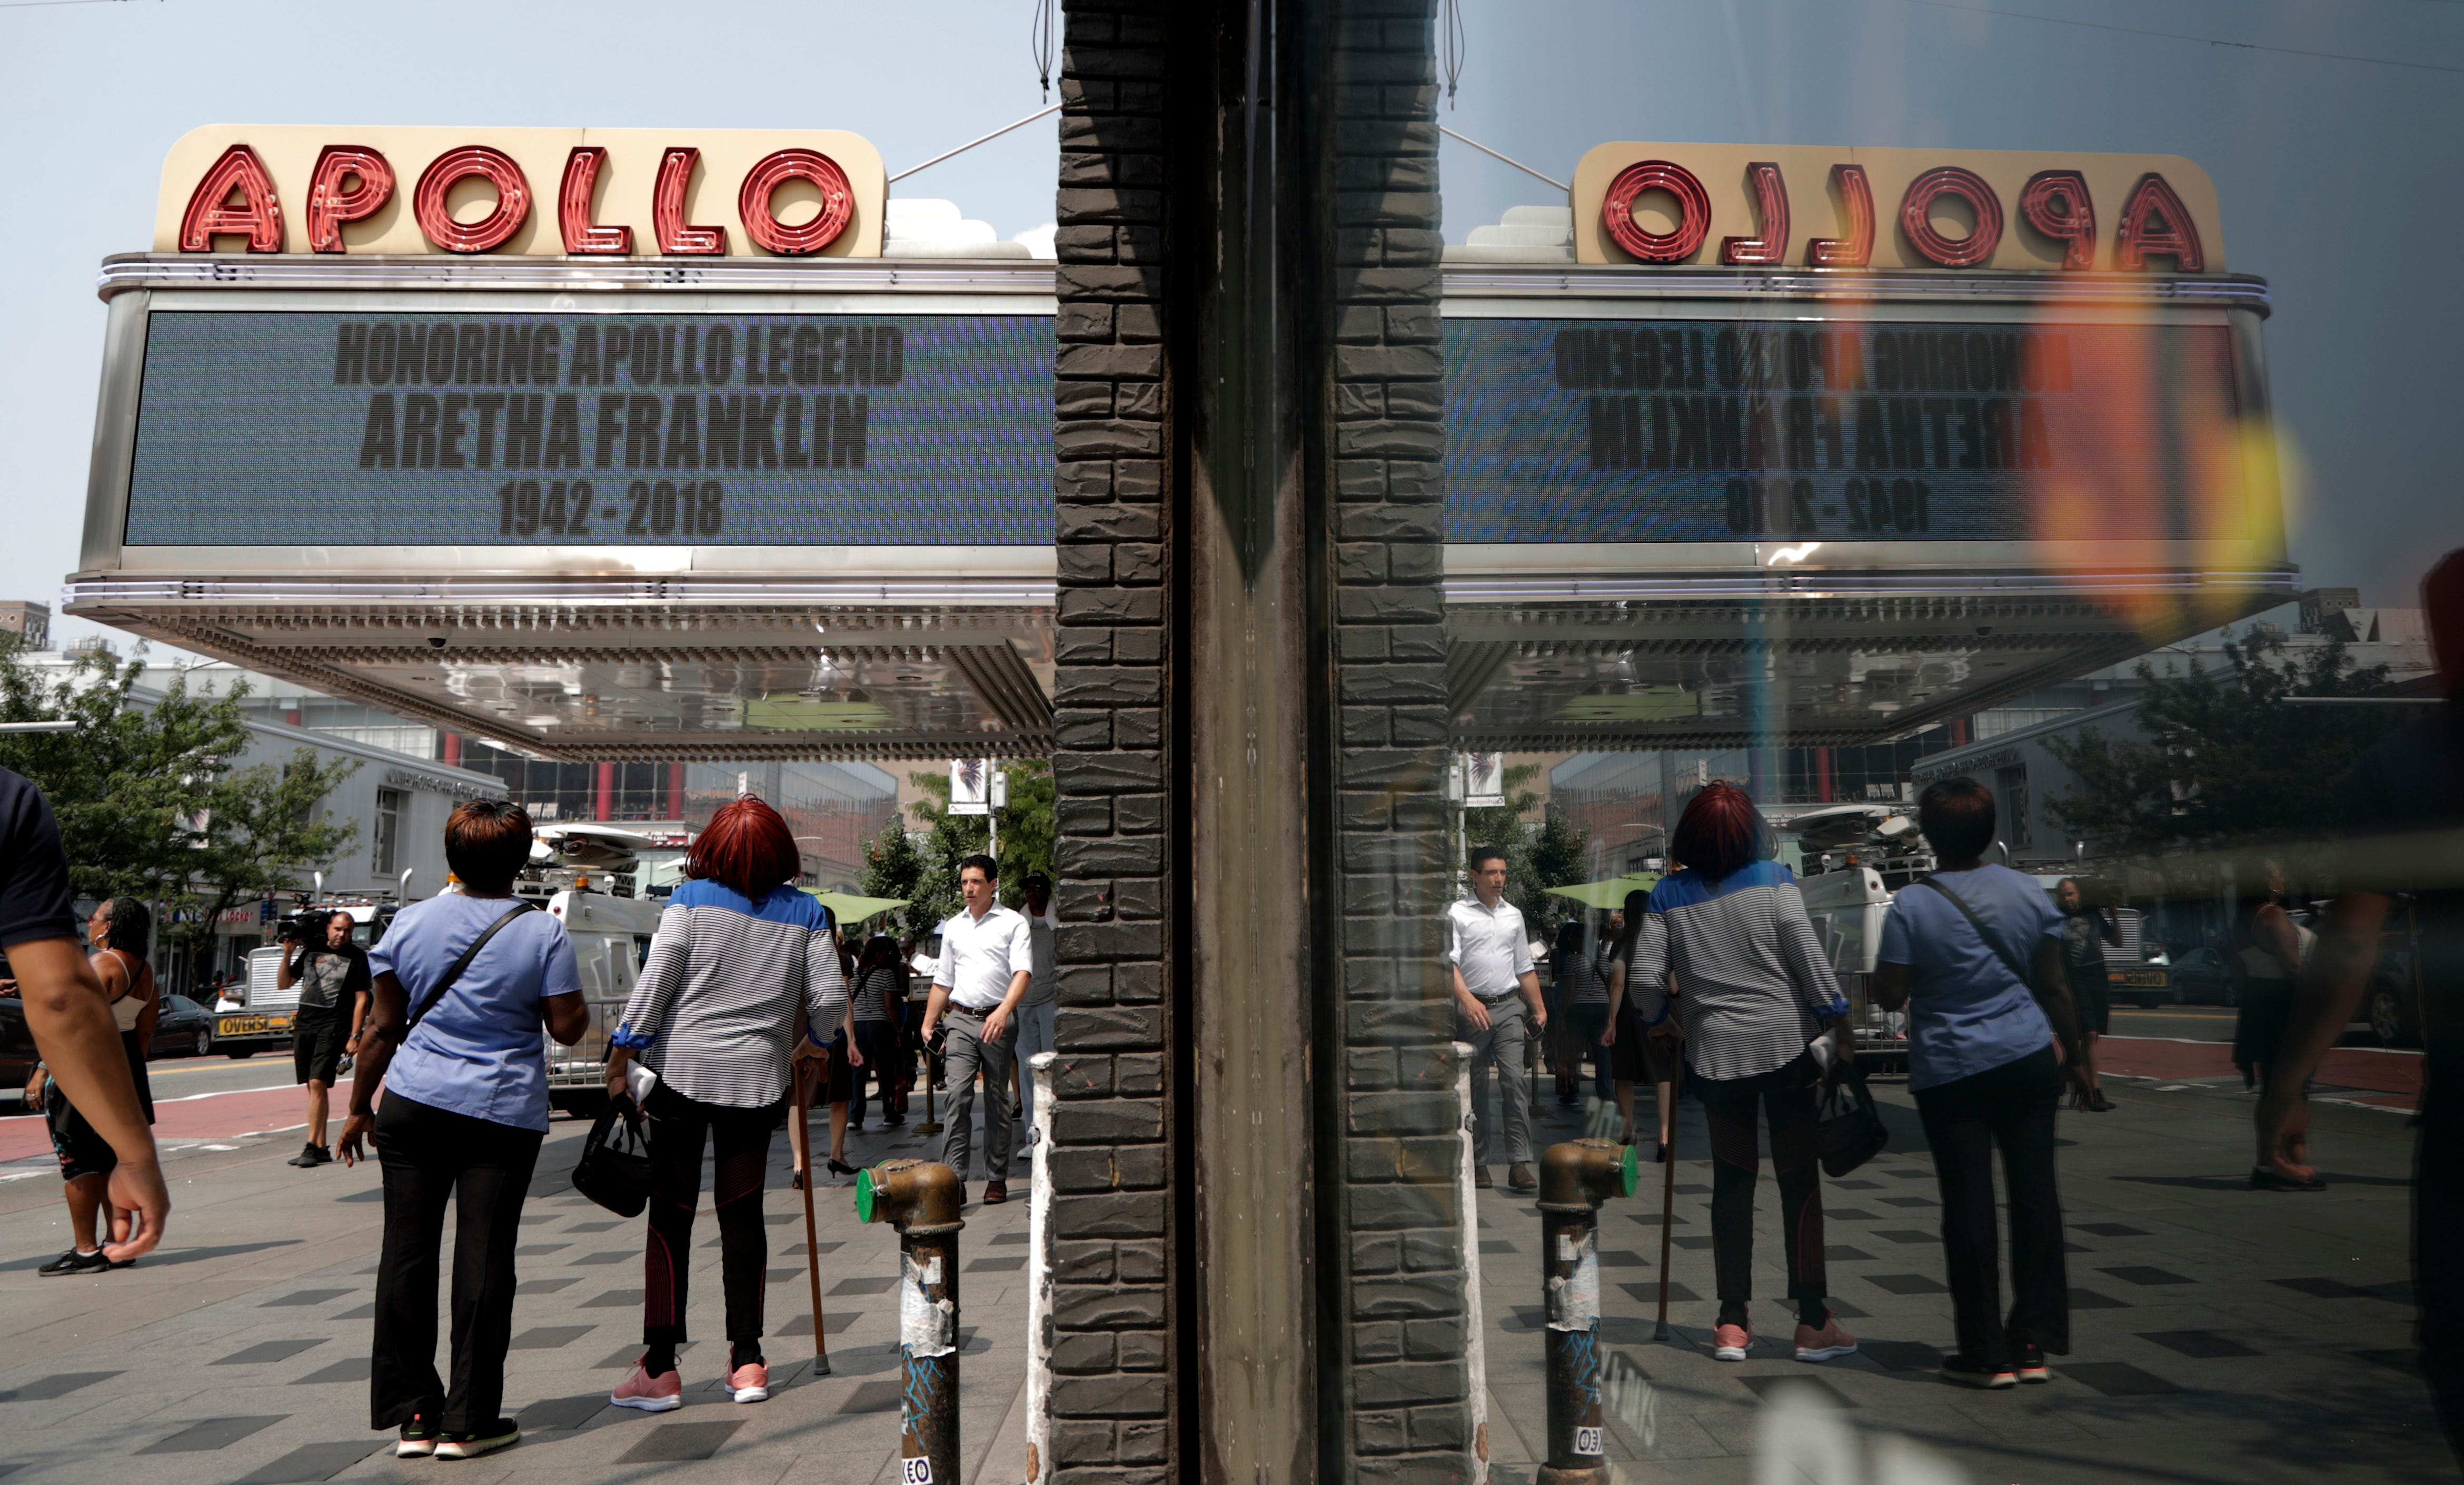 Women look up at the marquee of the Apollo Theater in the Harlem section of New York City, which displays a message honoring singer Aretha Franklin, Aug. 16, 2018. Franklin died in her home in Detroit at age 76 from pancreatic cancer.